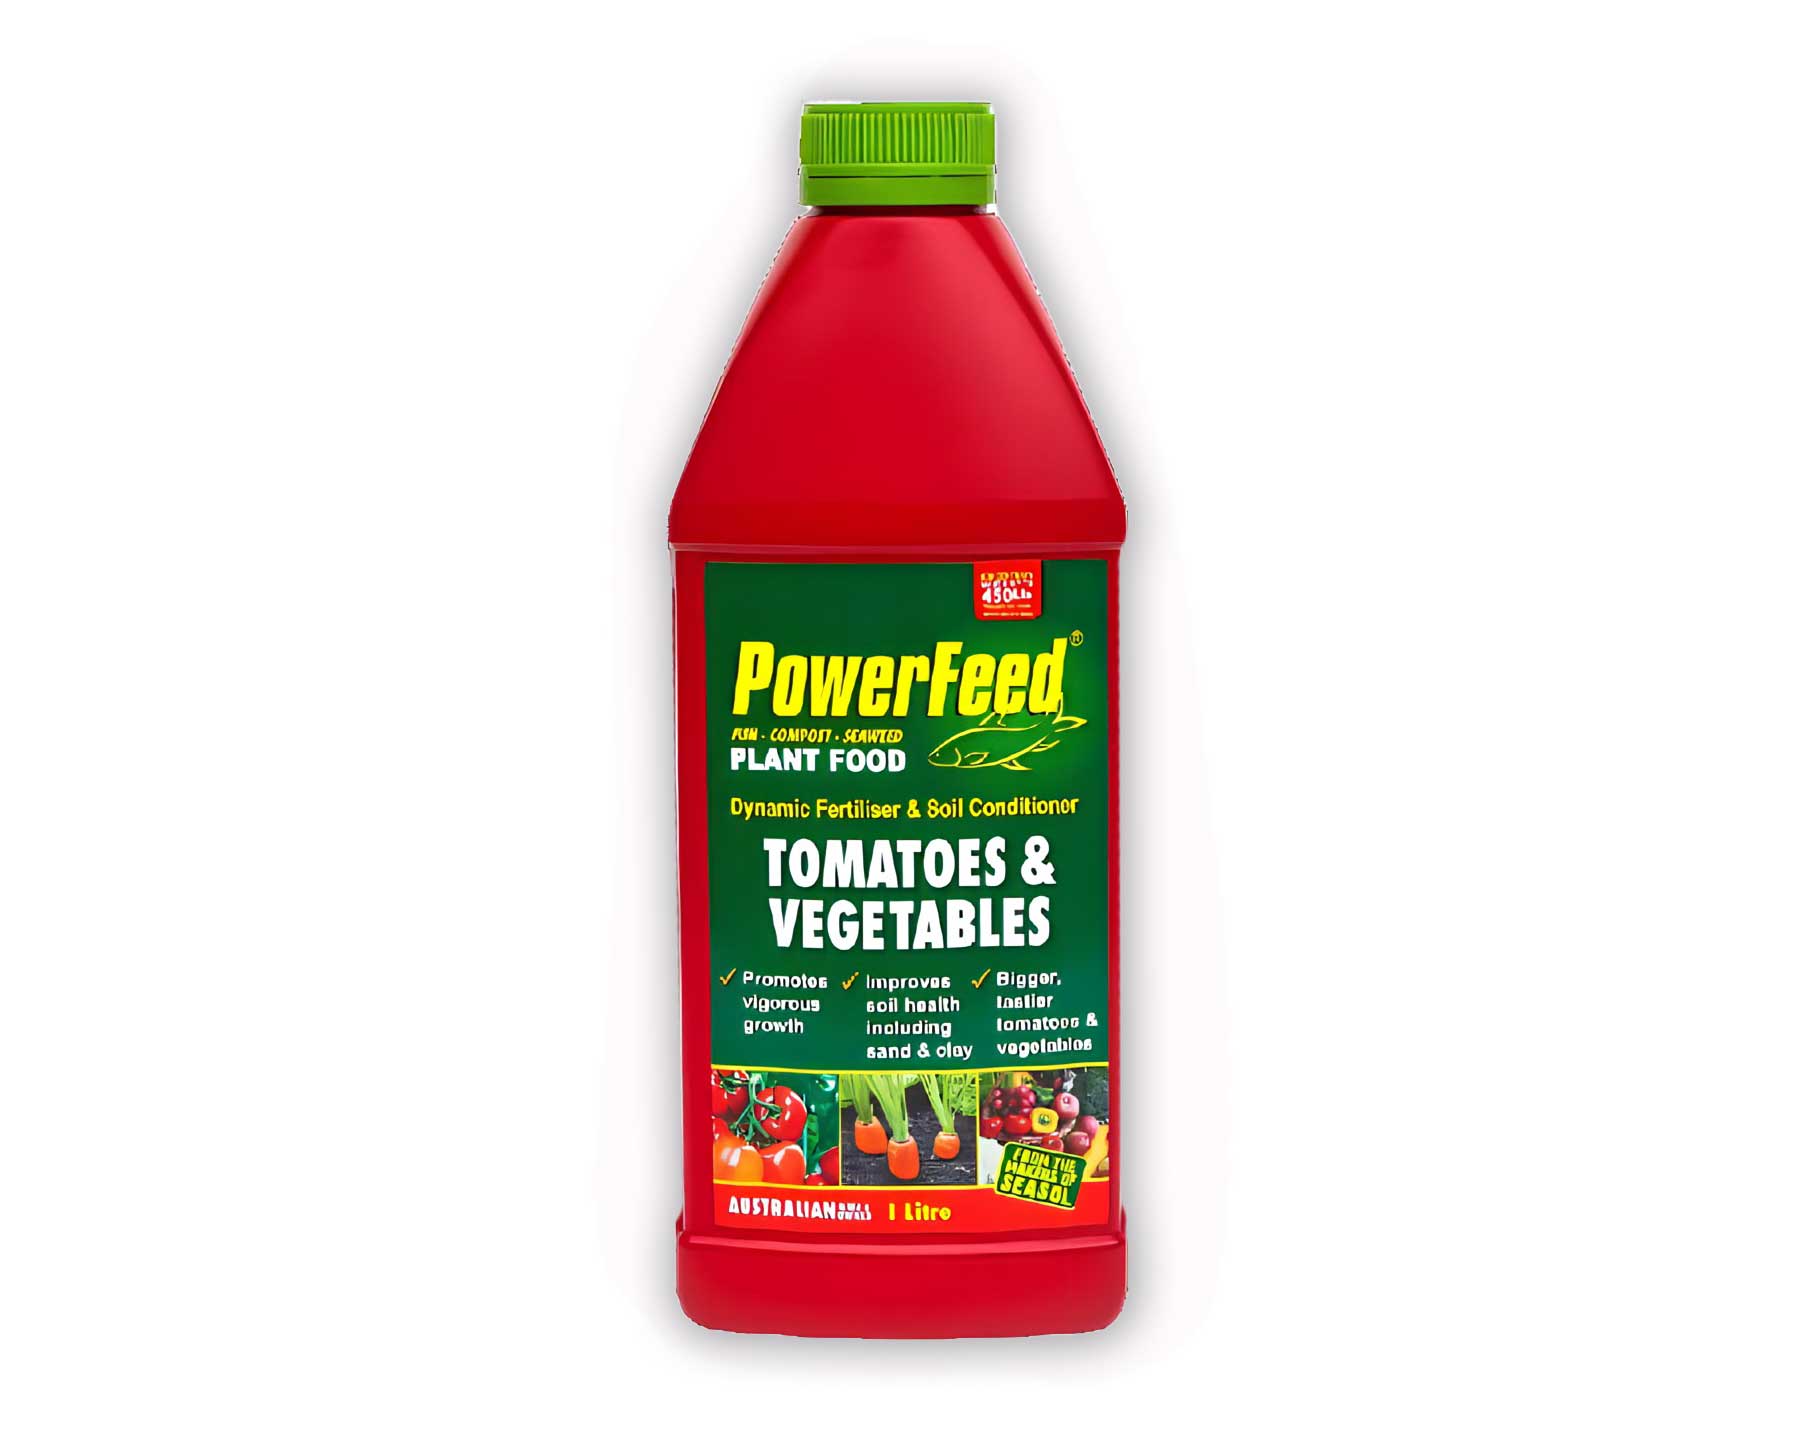 Powerfeed for toamtoes and Veggies, 1 litre - Seasol